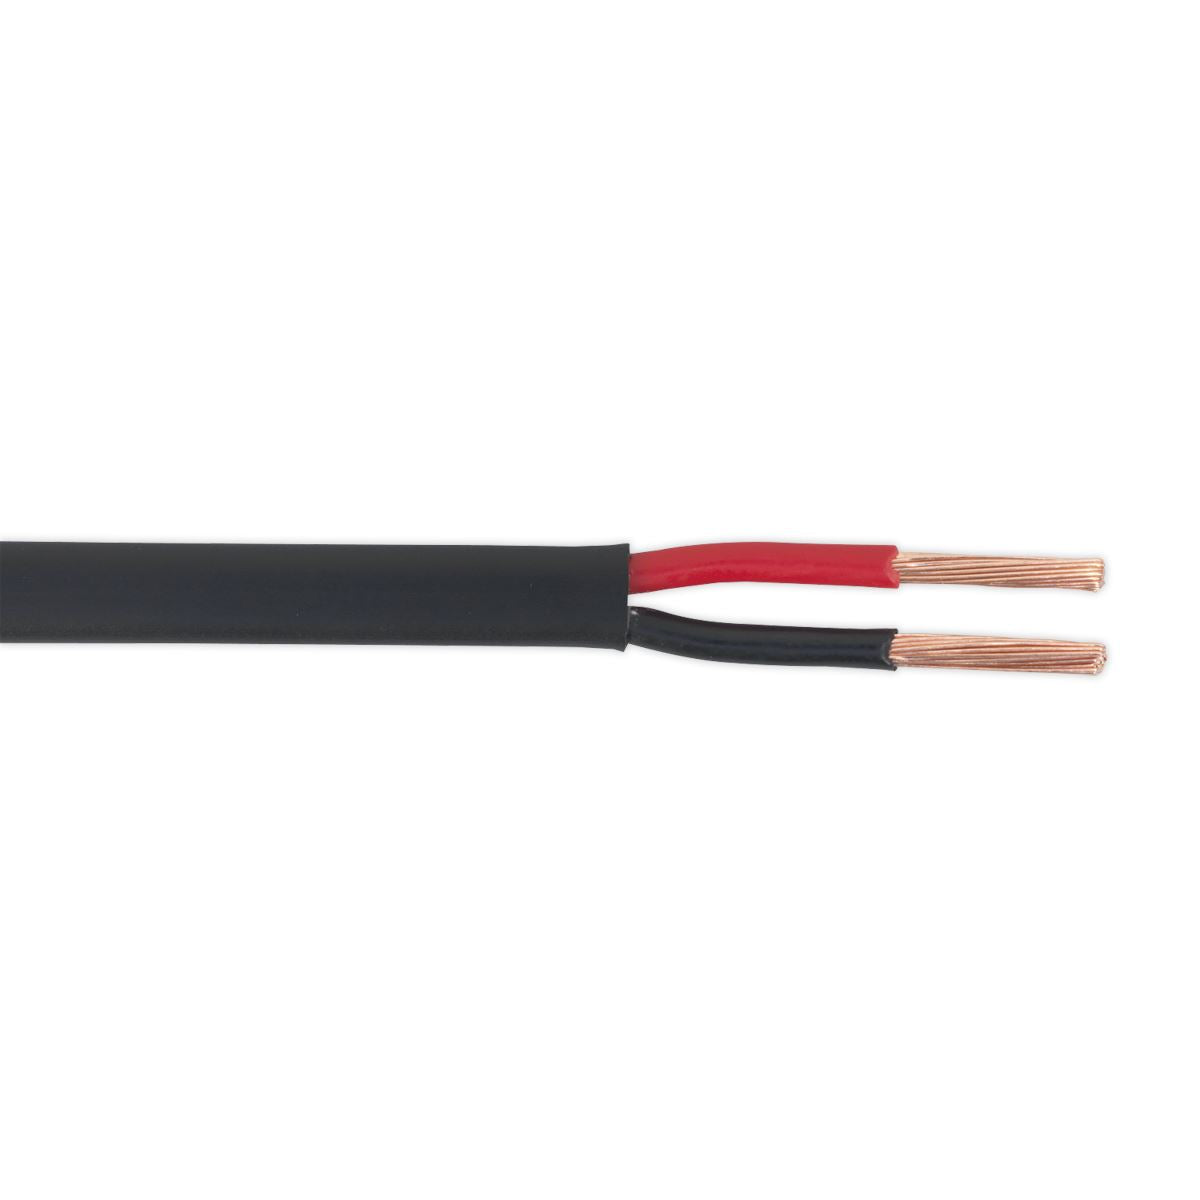 Sealey Automotive Cable Thin Wall Flat Twin 2 x 2mm² 28/0.30mm 30m Black